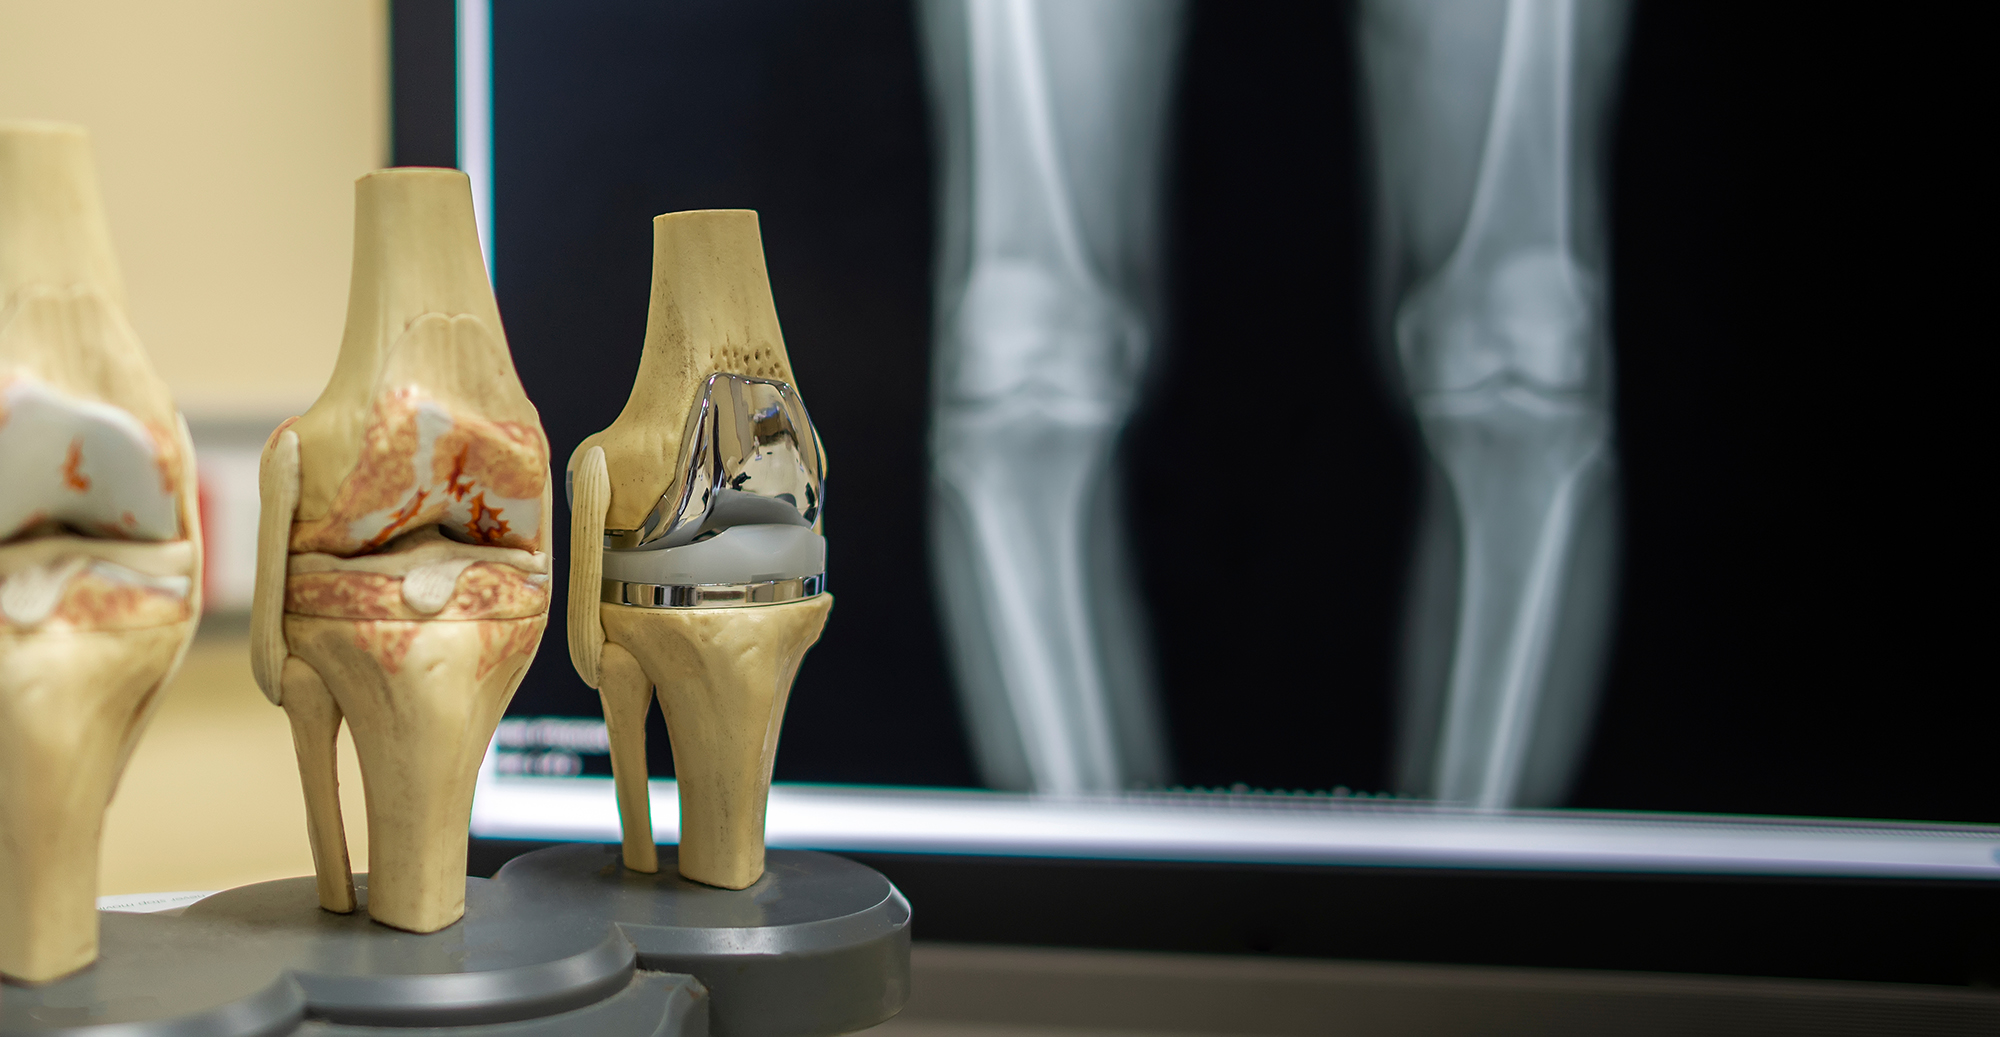 Artificial knee replacement surgery